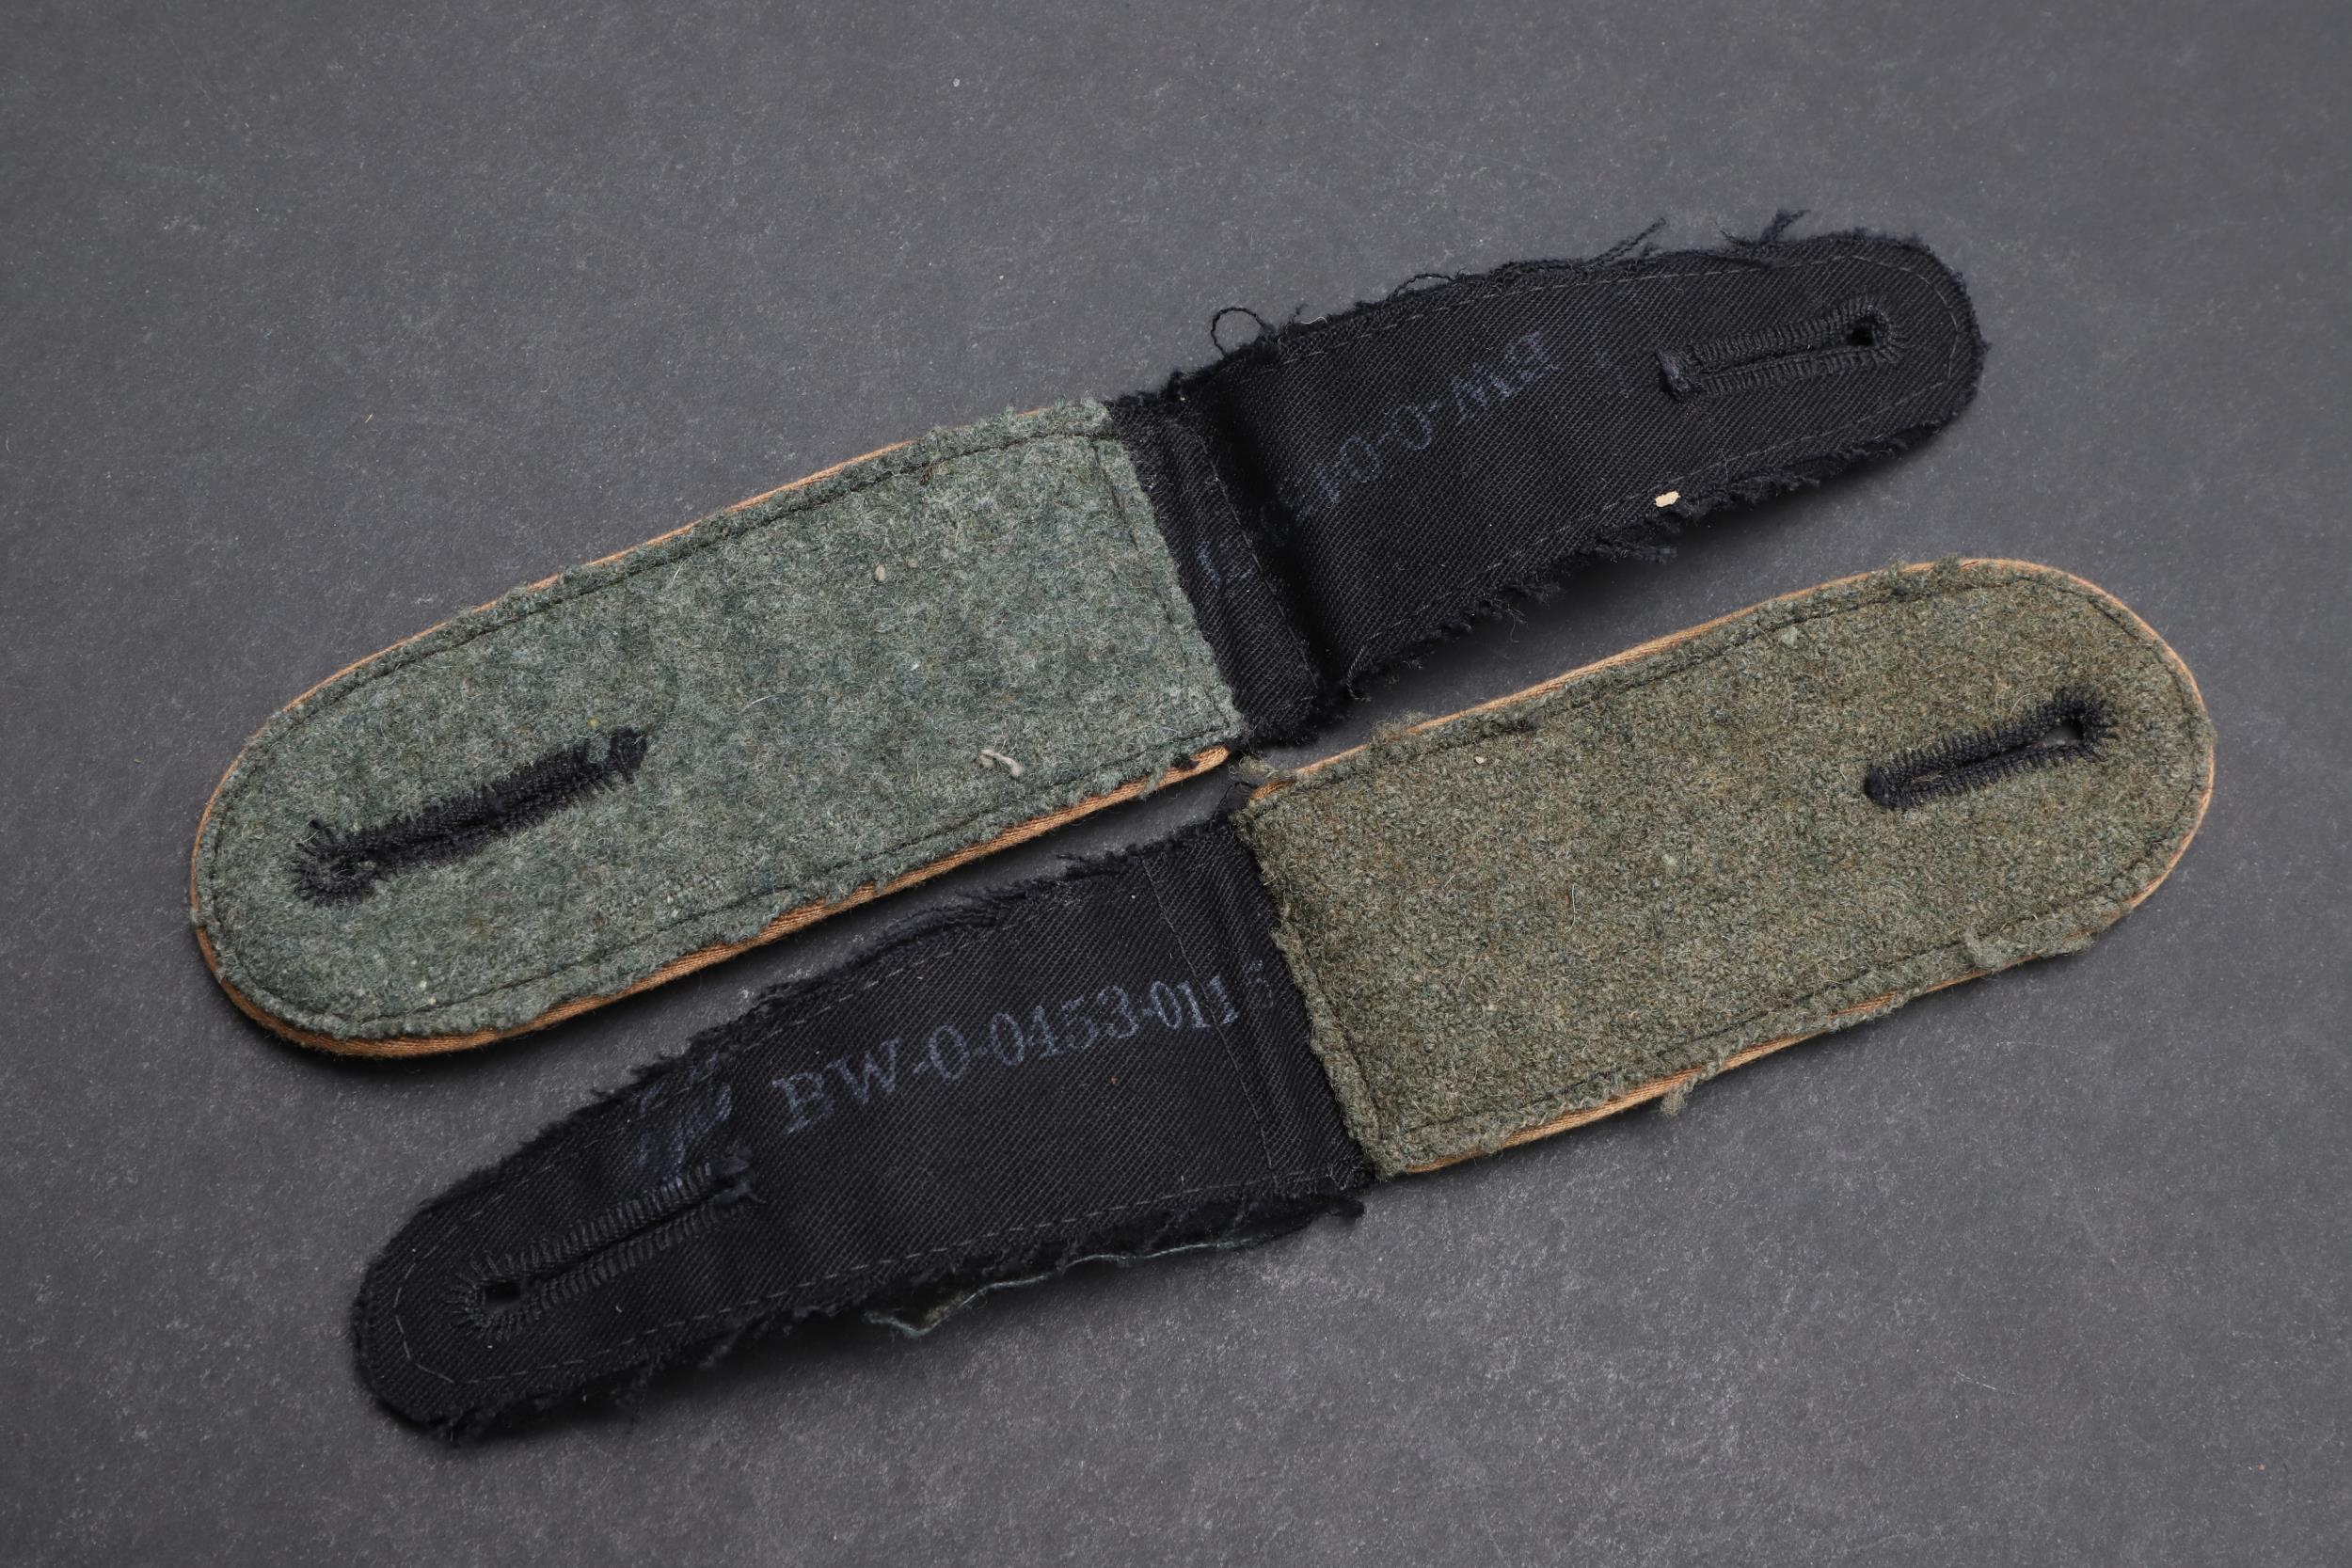 A PAIR OF SECOND WORLD WAR GERMAN WAFFEN-SS MAN'S SHOULDER STRAPS. - Image 4 of 6